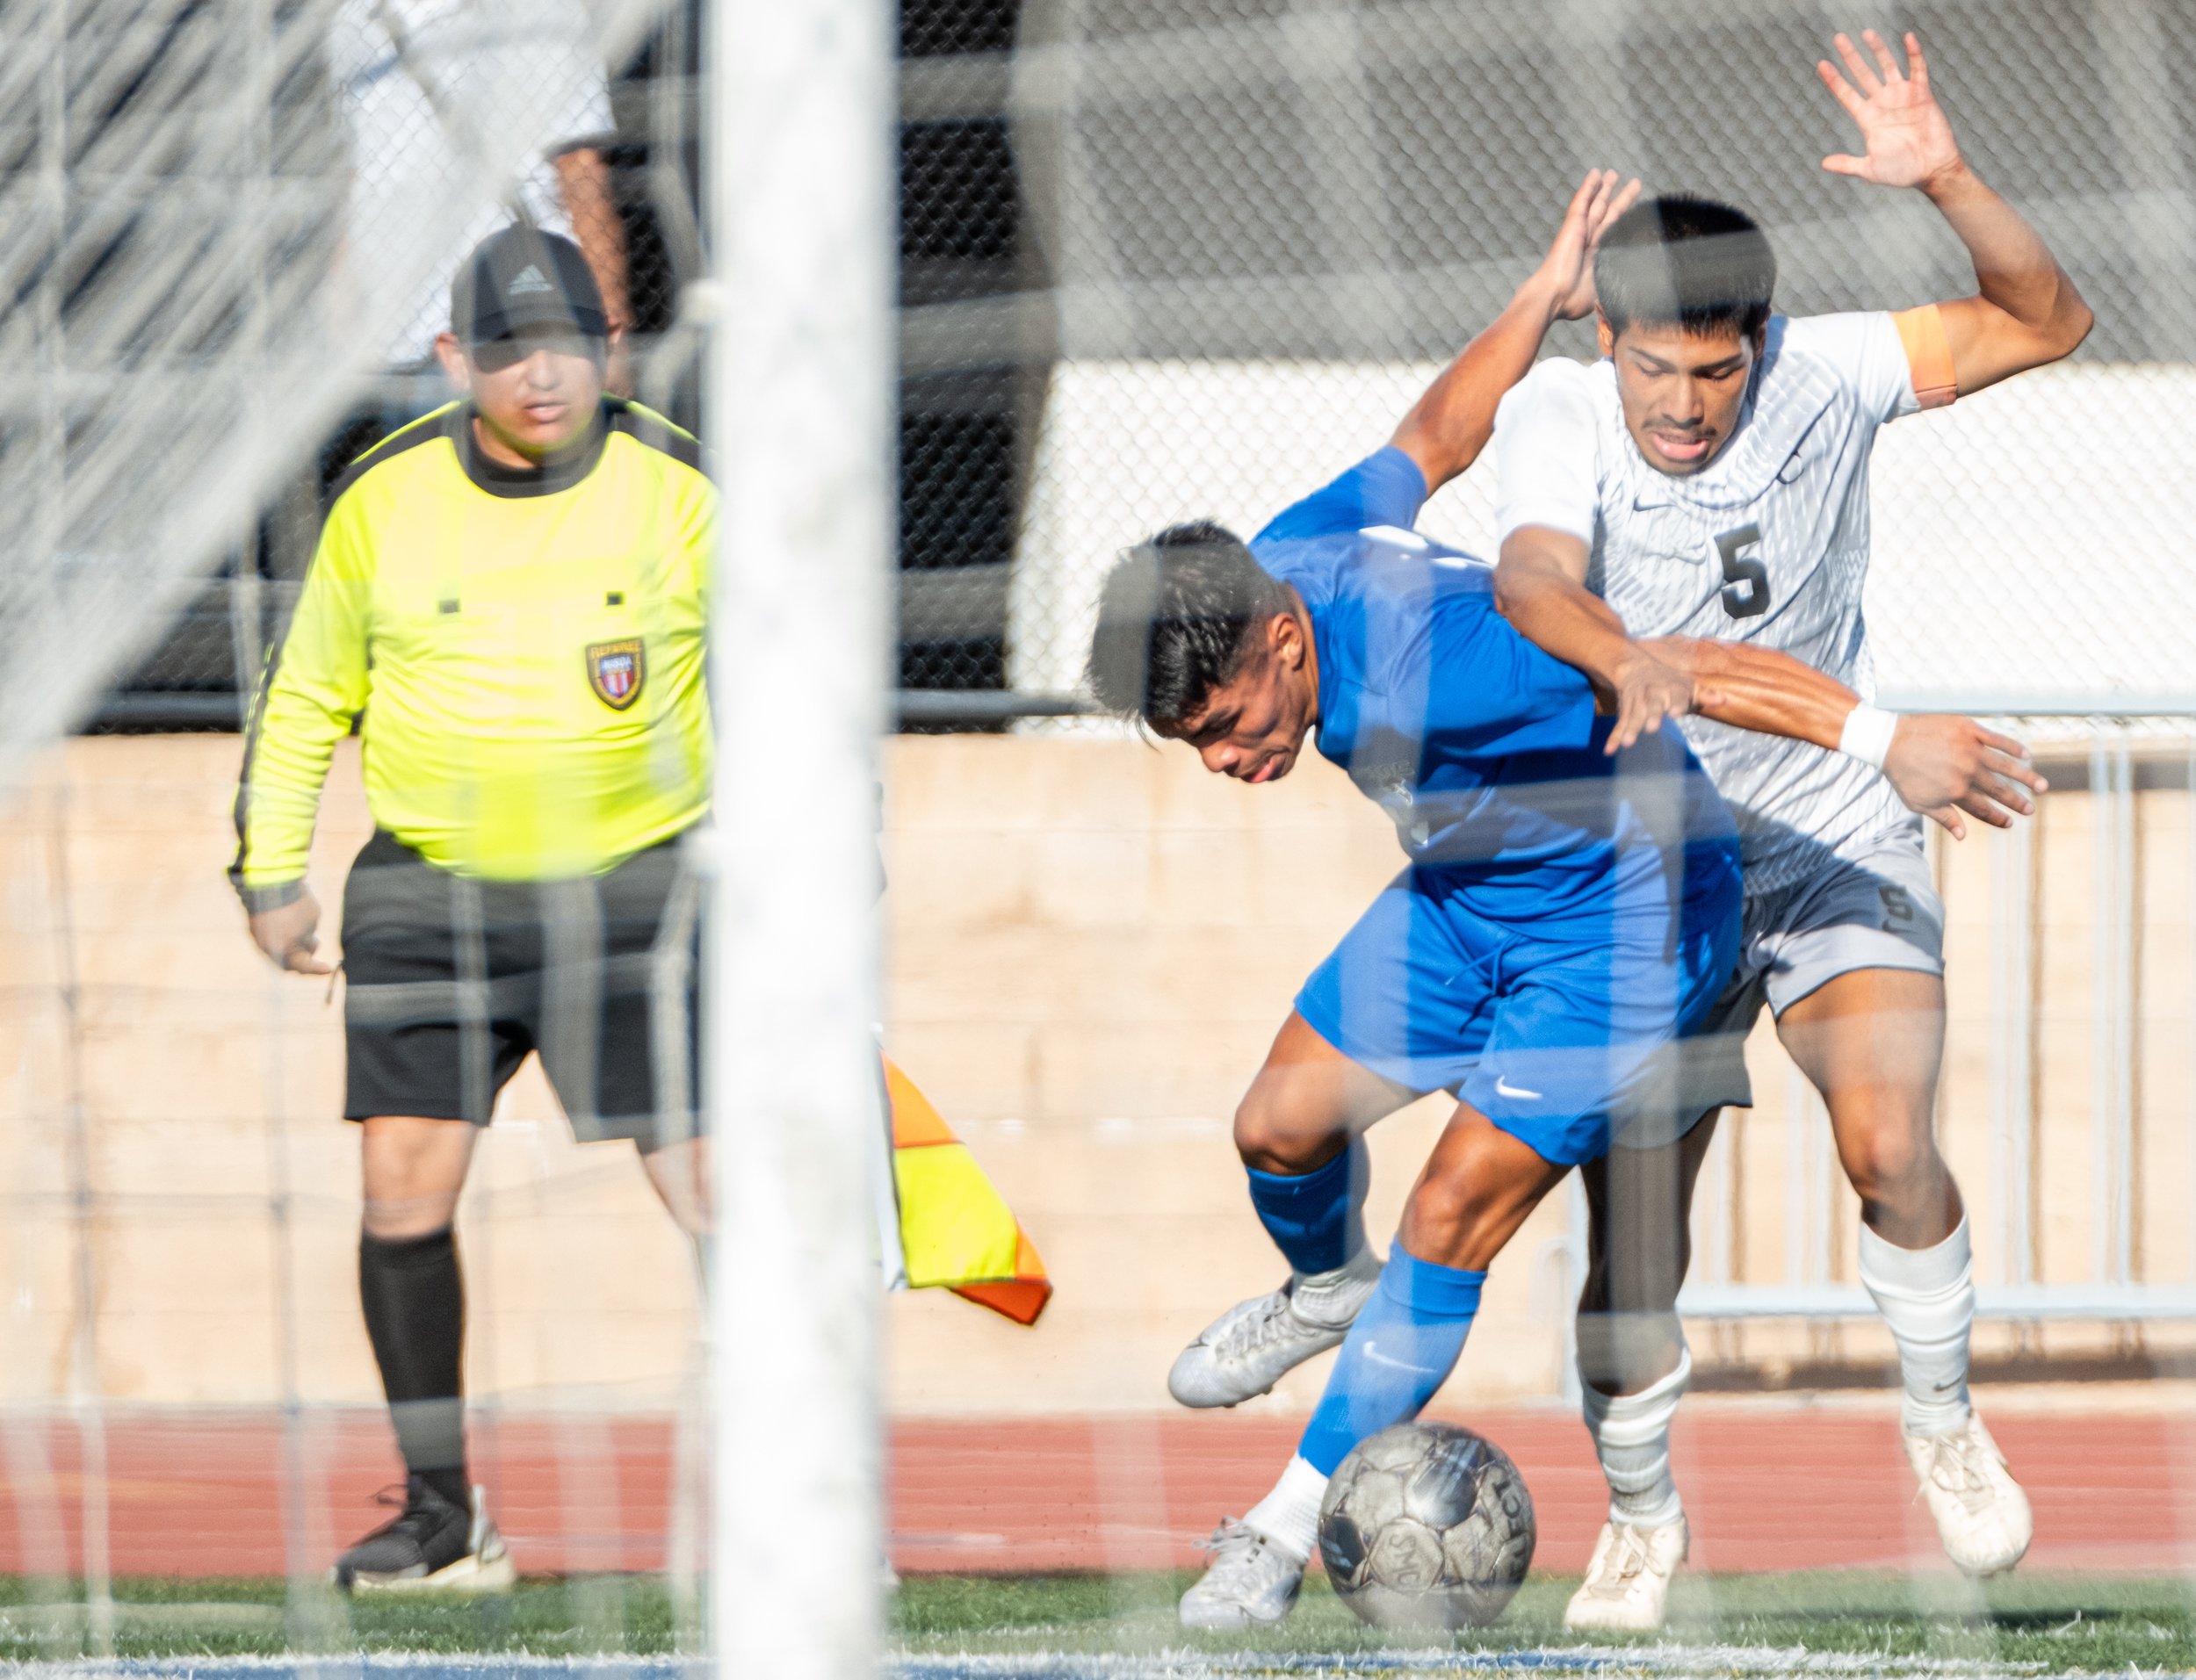  Santa Monica College(SMC) men's soccer defender Gare Arai(L) playing time against Bakersfield Renegade defender Jonathan Juarez(5) on Tues, Oct. 3. SMC would go and shutout the Renegades with a score of 3-0 at Corsair Field in Santa Monica, Calif. (